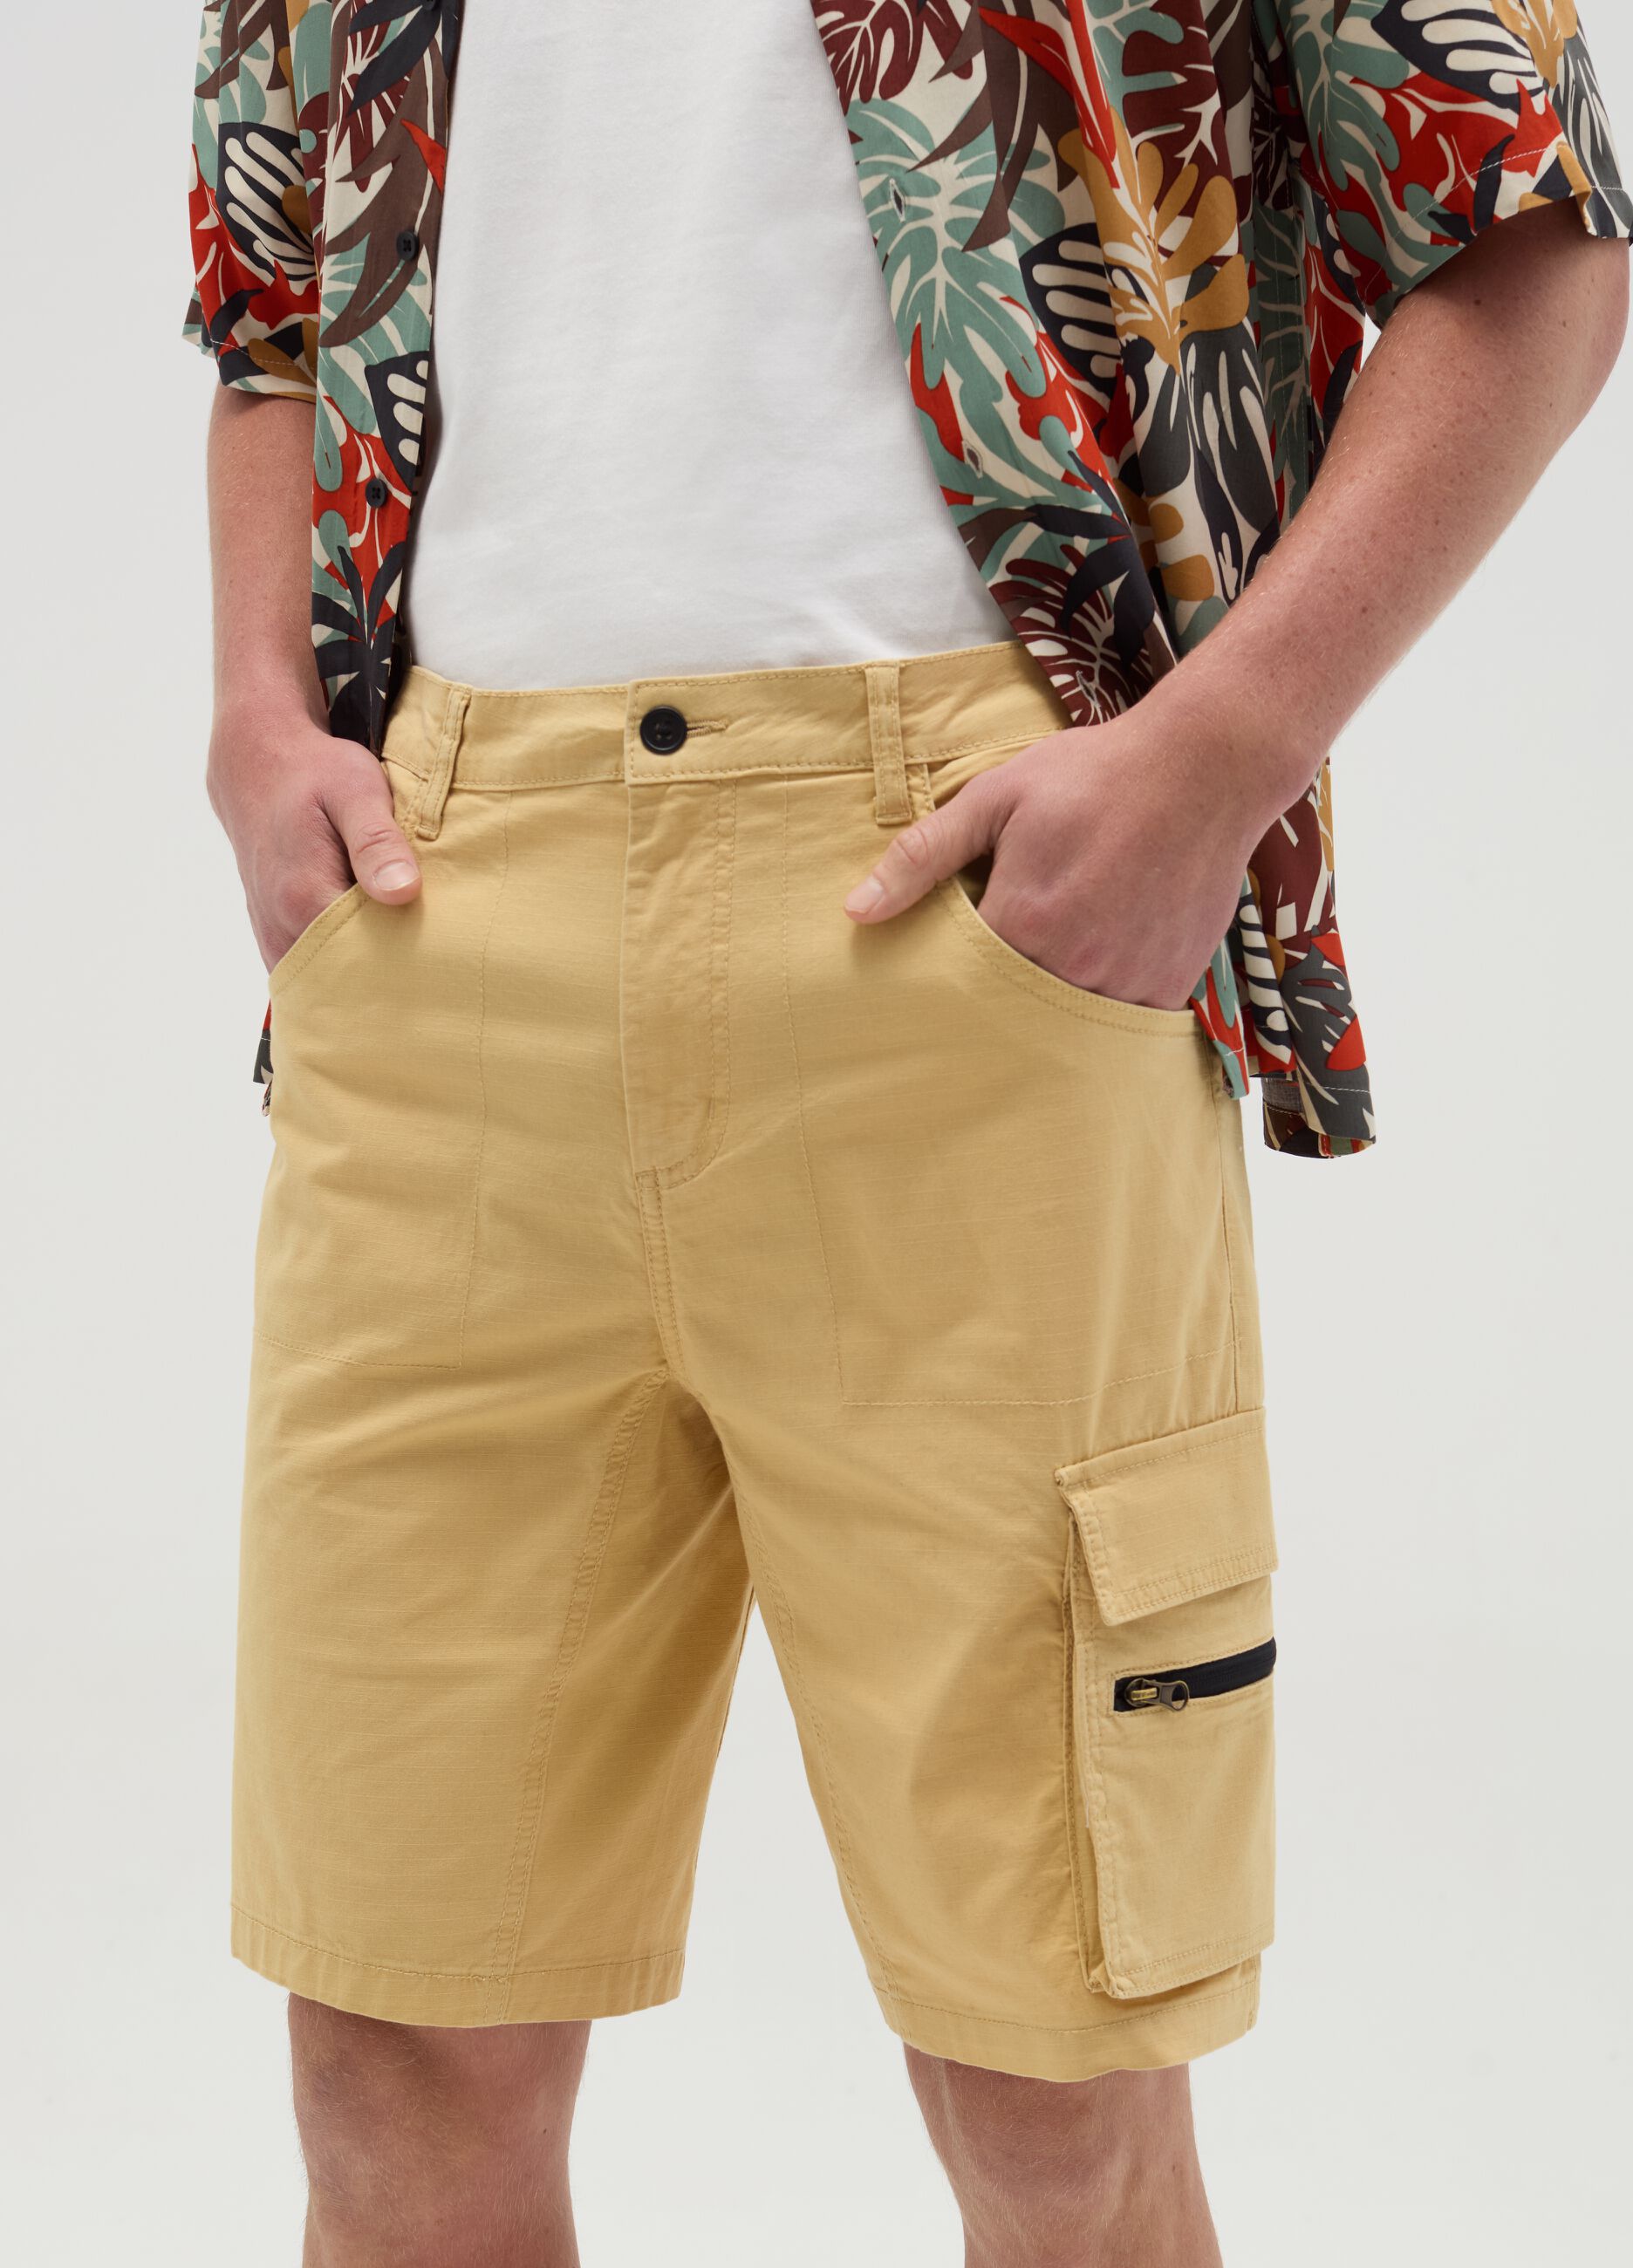 Cargo Bermuda shorts with ripstop weave